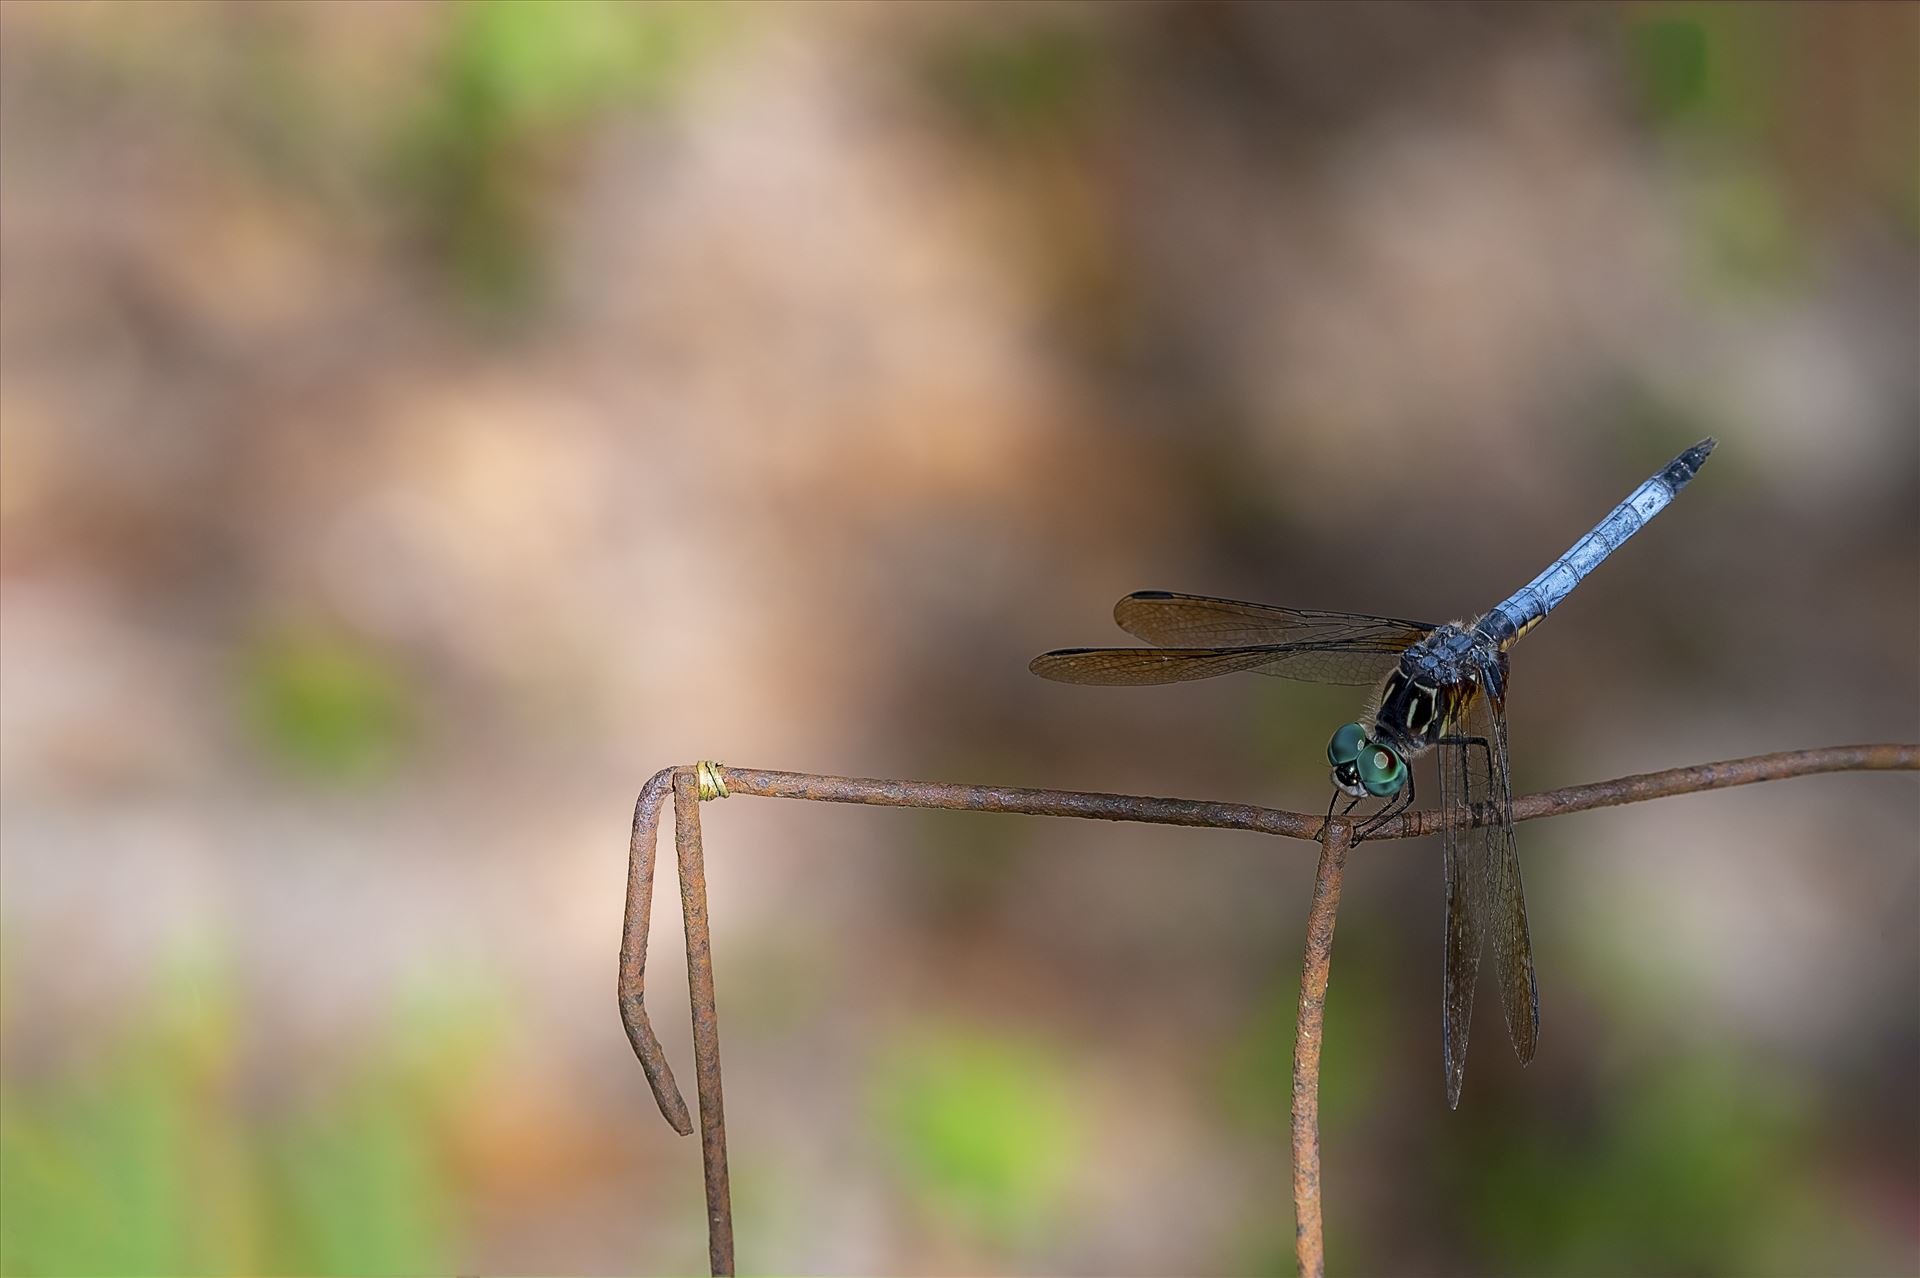 blue green dragonfly on rusted wire fence ss as 8500196.jpg close up macro photography of green and blue dragonfly that landed on an old rusty wire fence by Terry Kelly Photography